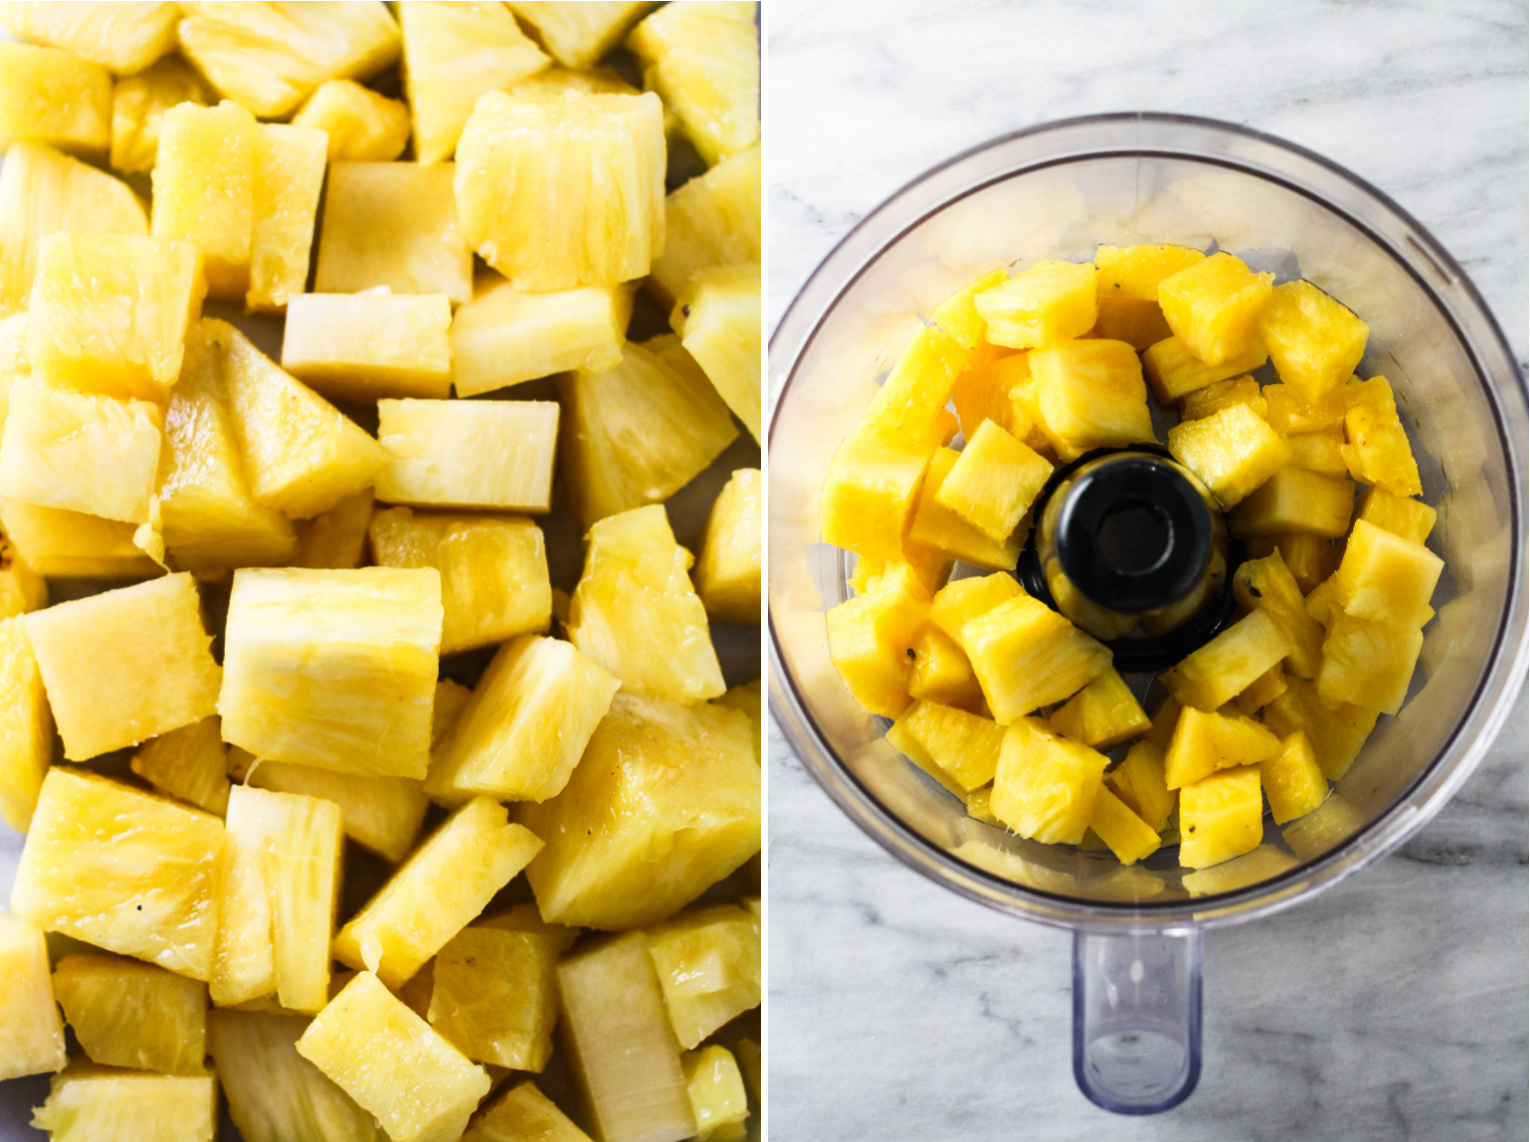 Collage of two side-by-side images. On the left, an image of chopped pineapple. On the right, an image of chopped pineapple inside a blender bowl.